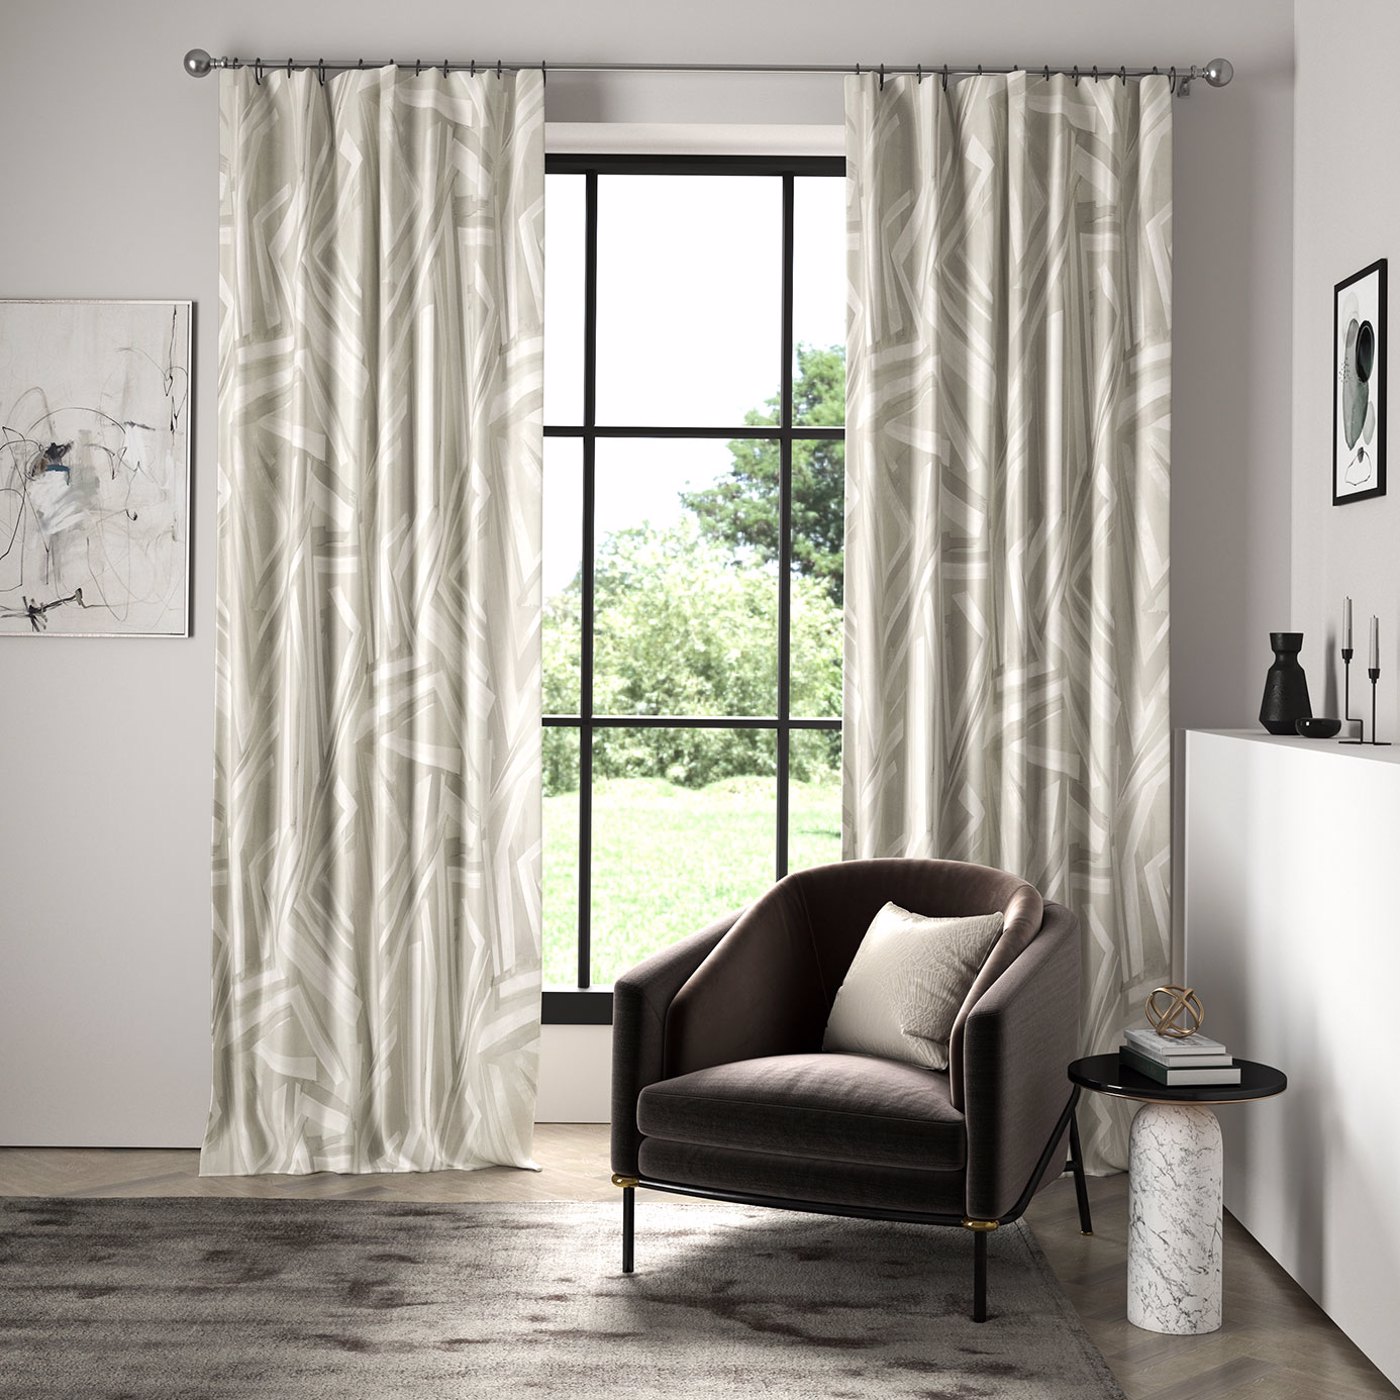 Transverse Marble Fabric by HAR